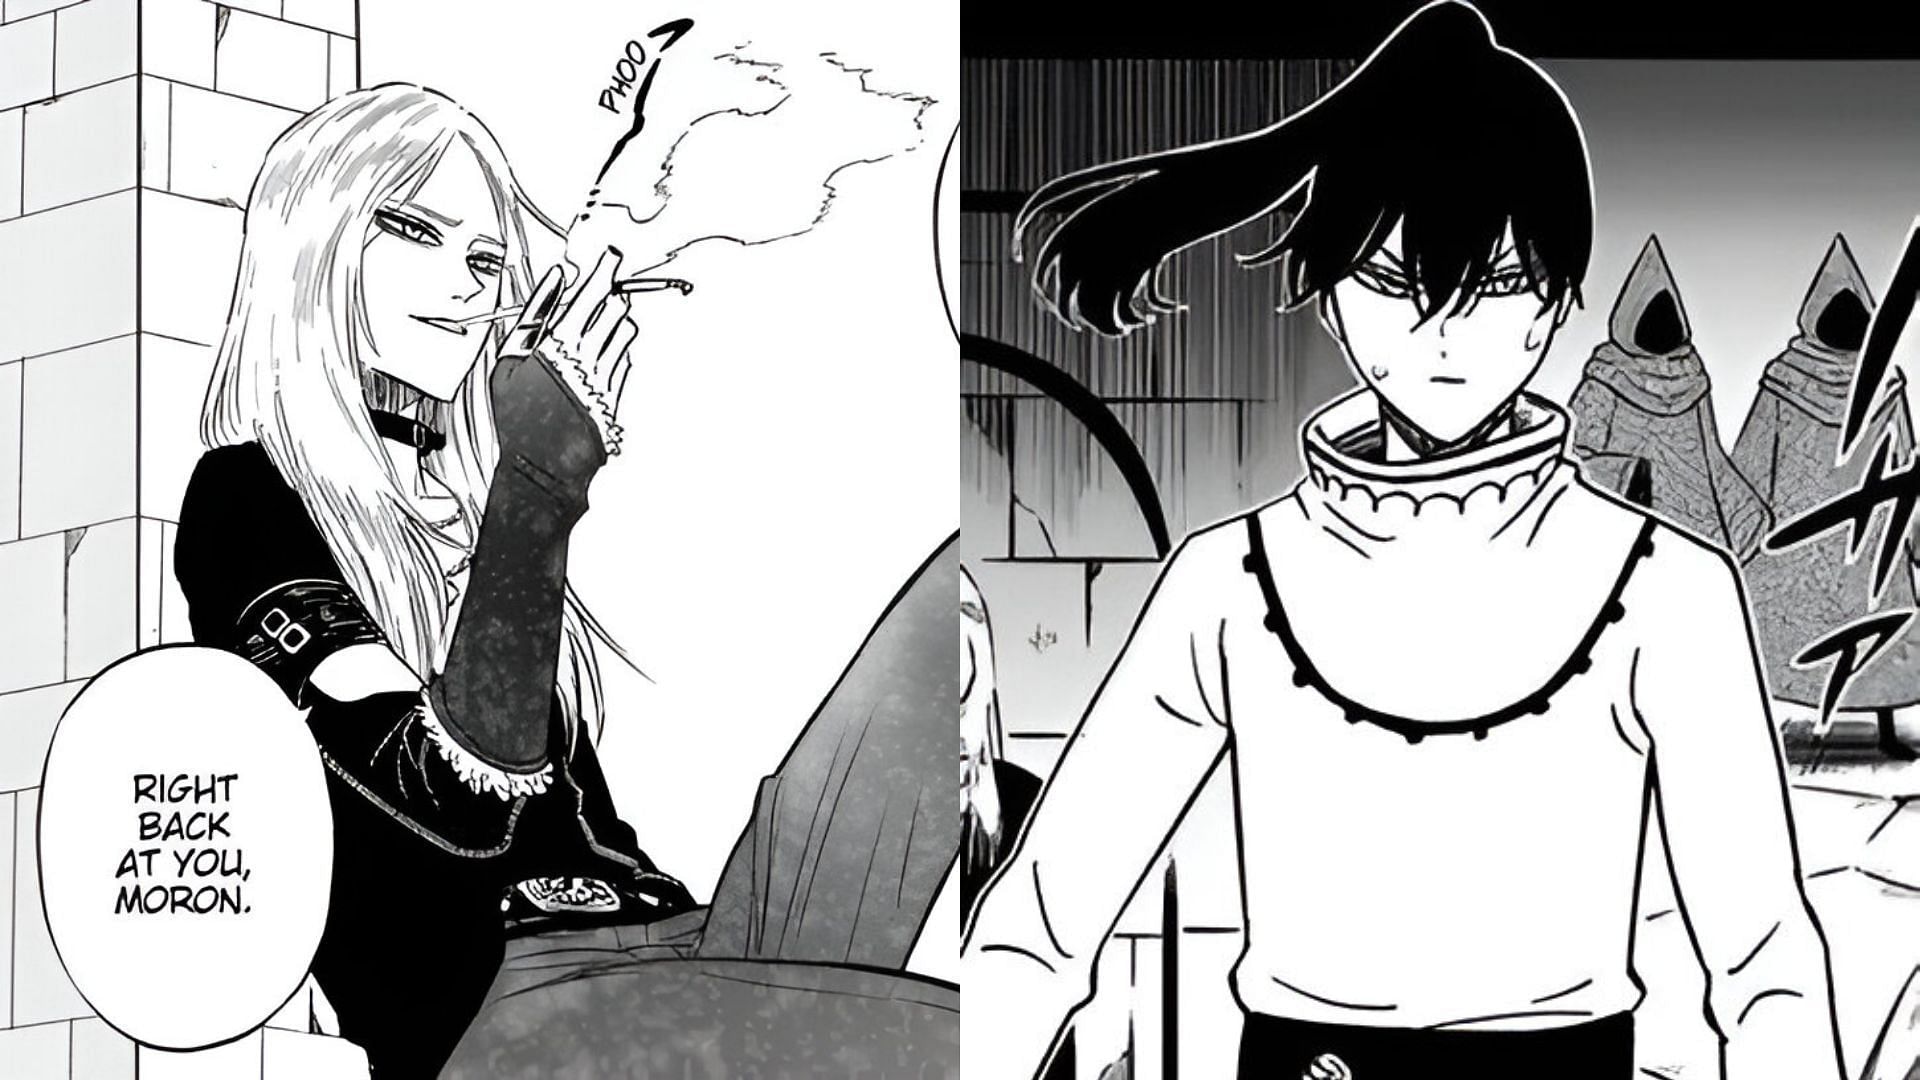 Nacht and Morgen Faust as seen in Black Clover (Image via Shueisha)